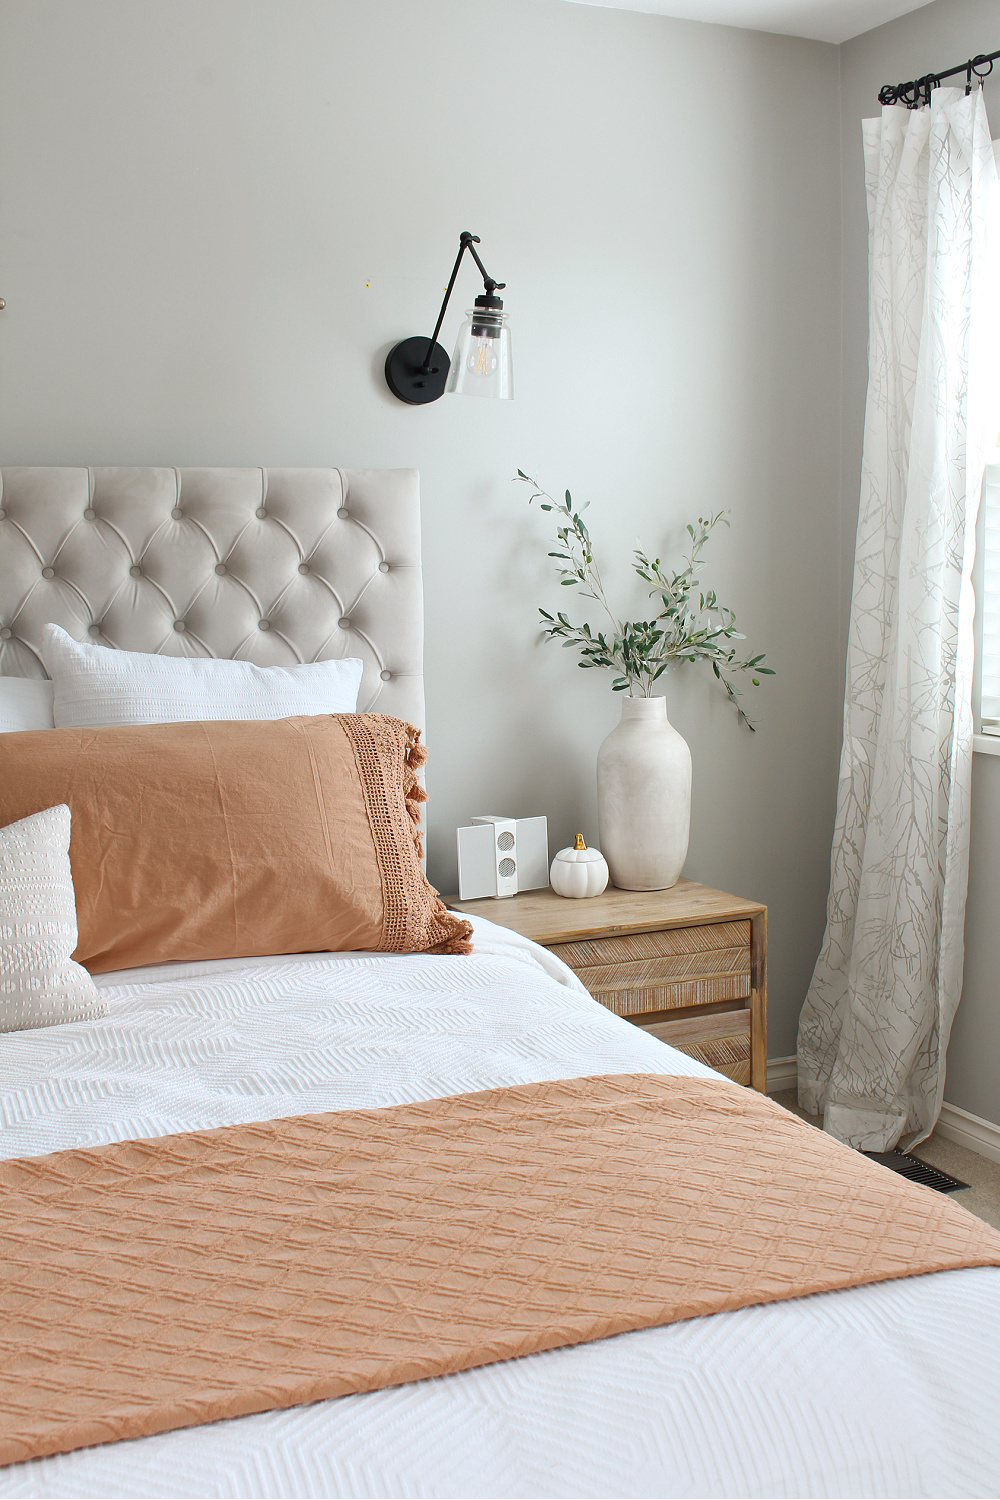 Upholstered bed dressed up for fall with a white duvet and terra cotta quilt and shams.